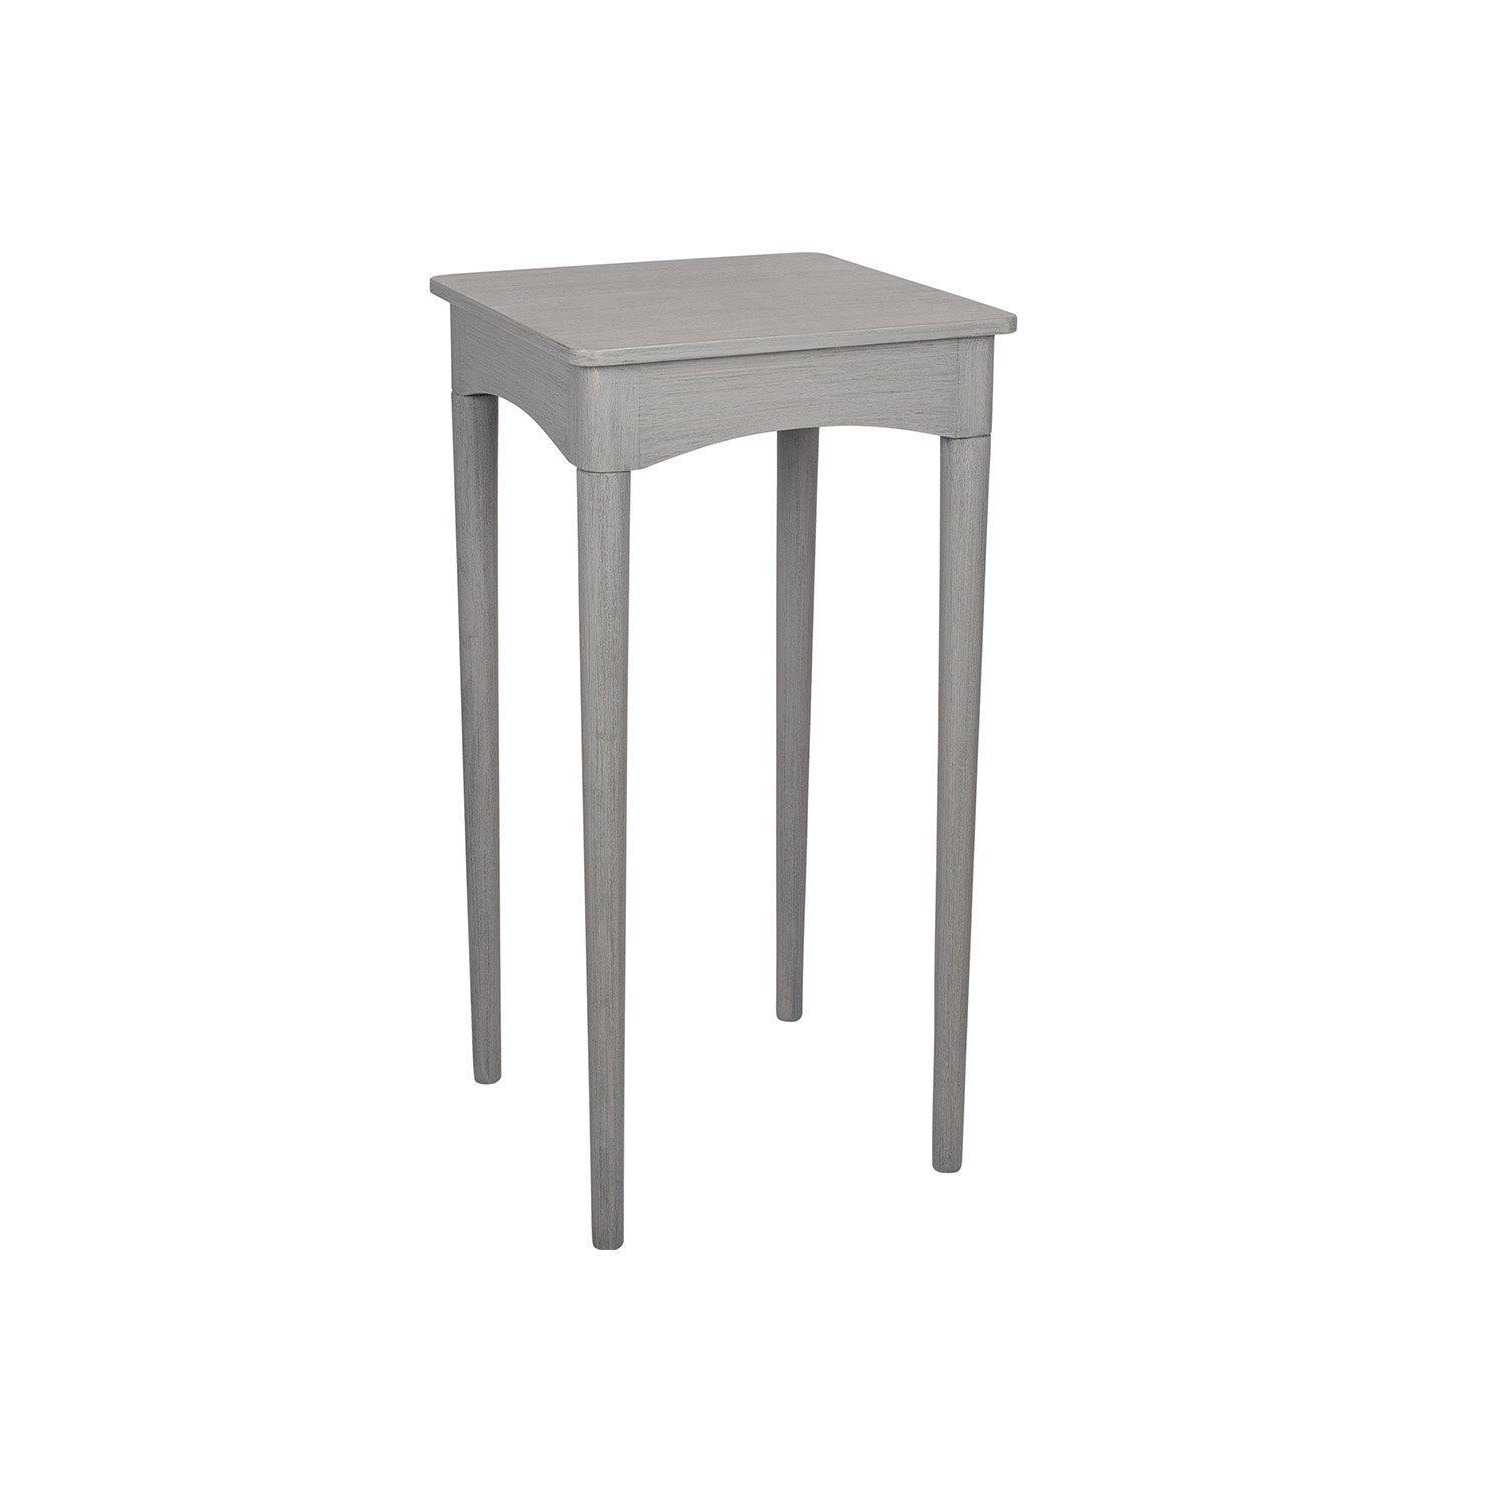 Pine Wood Pre-Assembled Square Tapered Tall Side Table - image 1